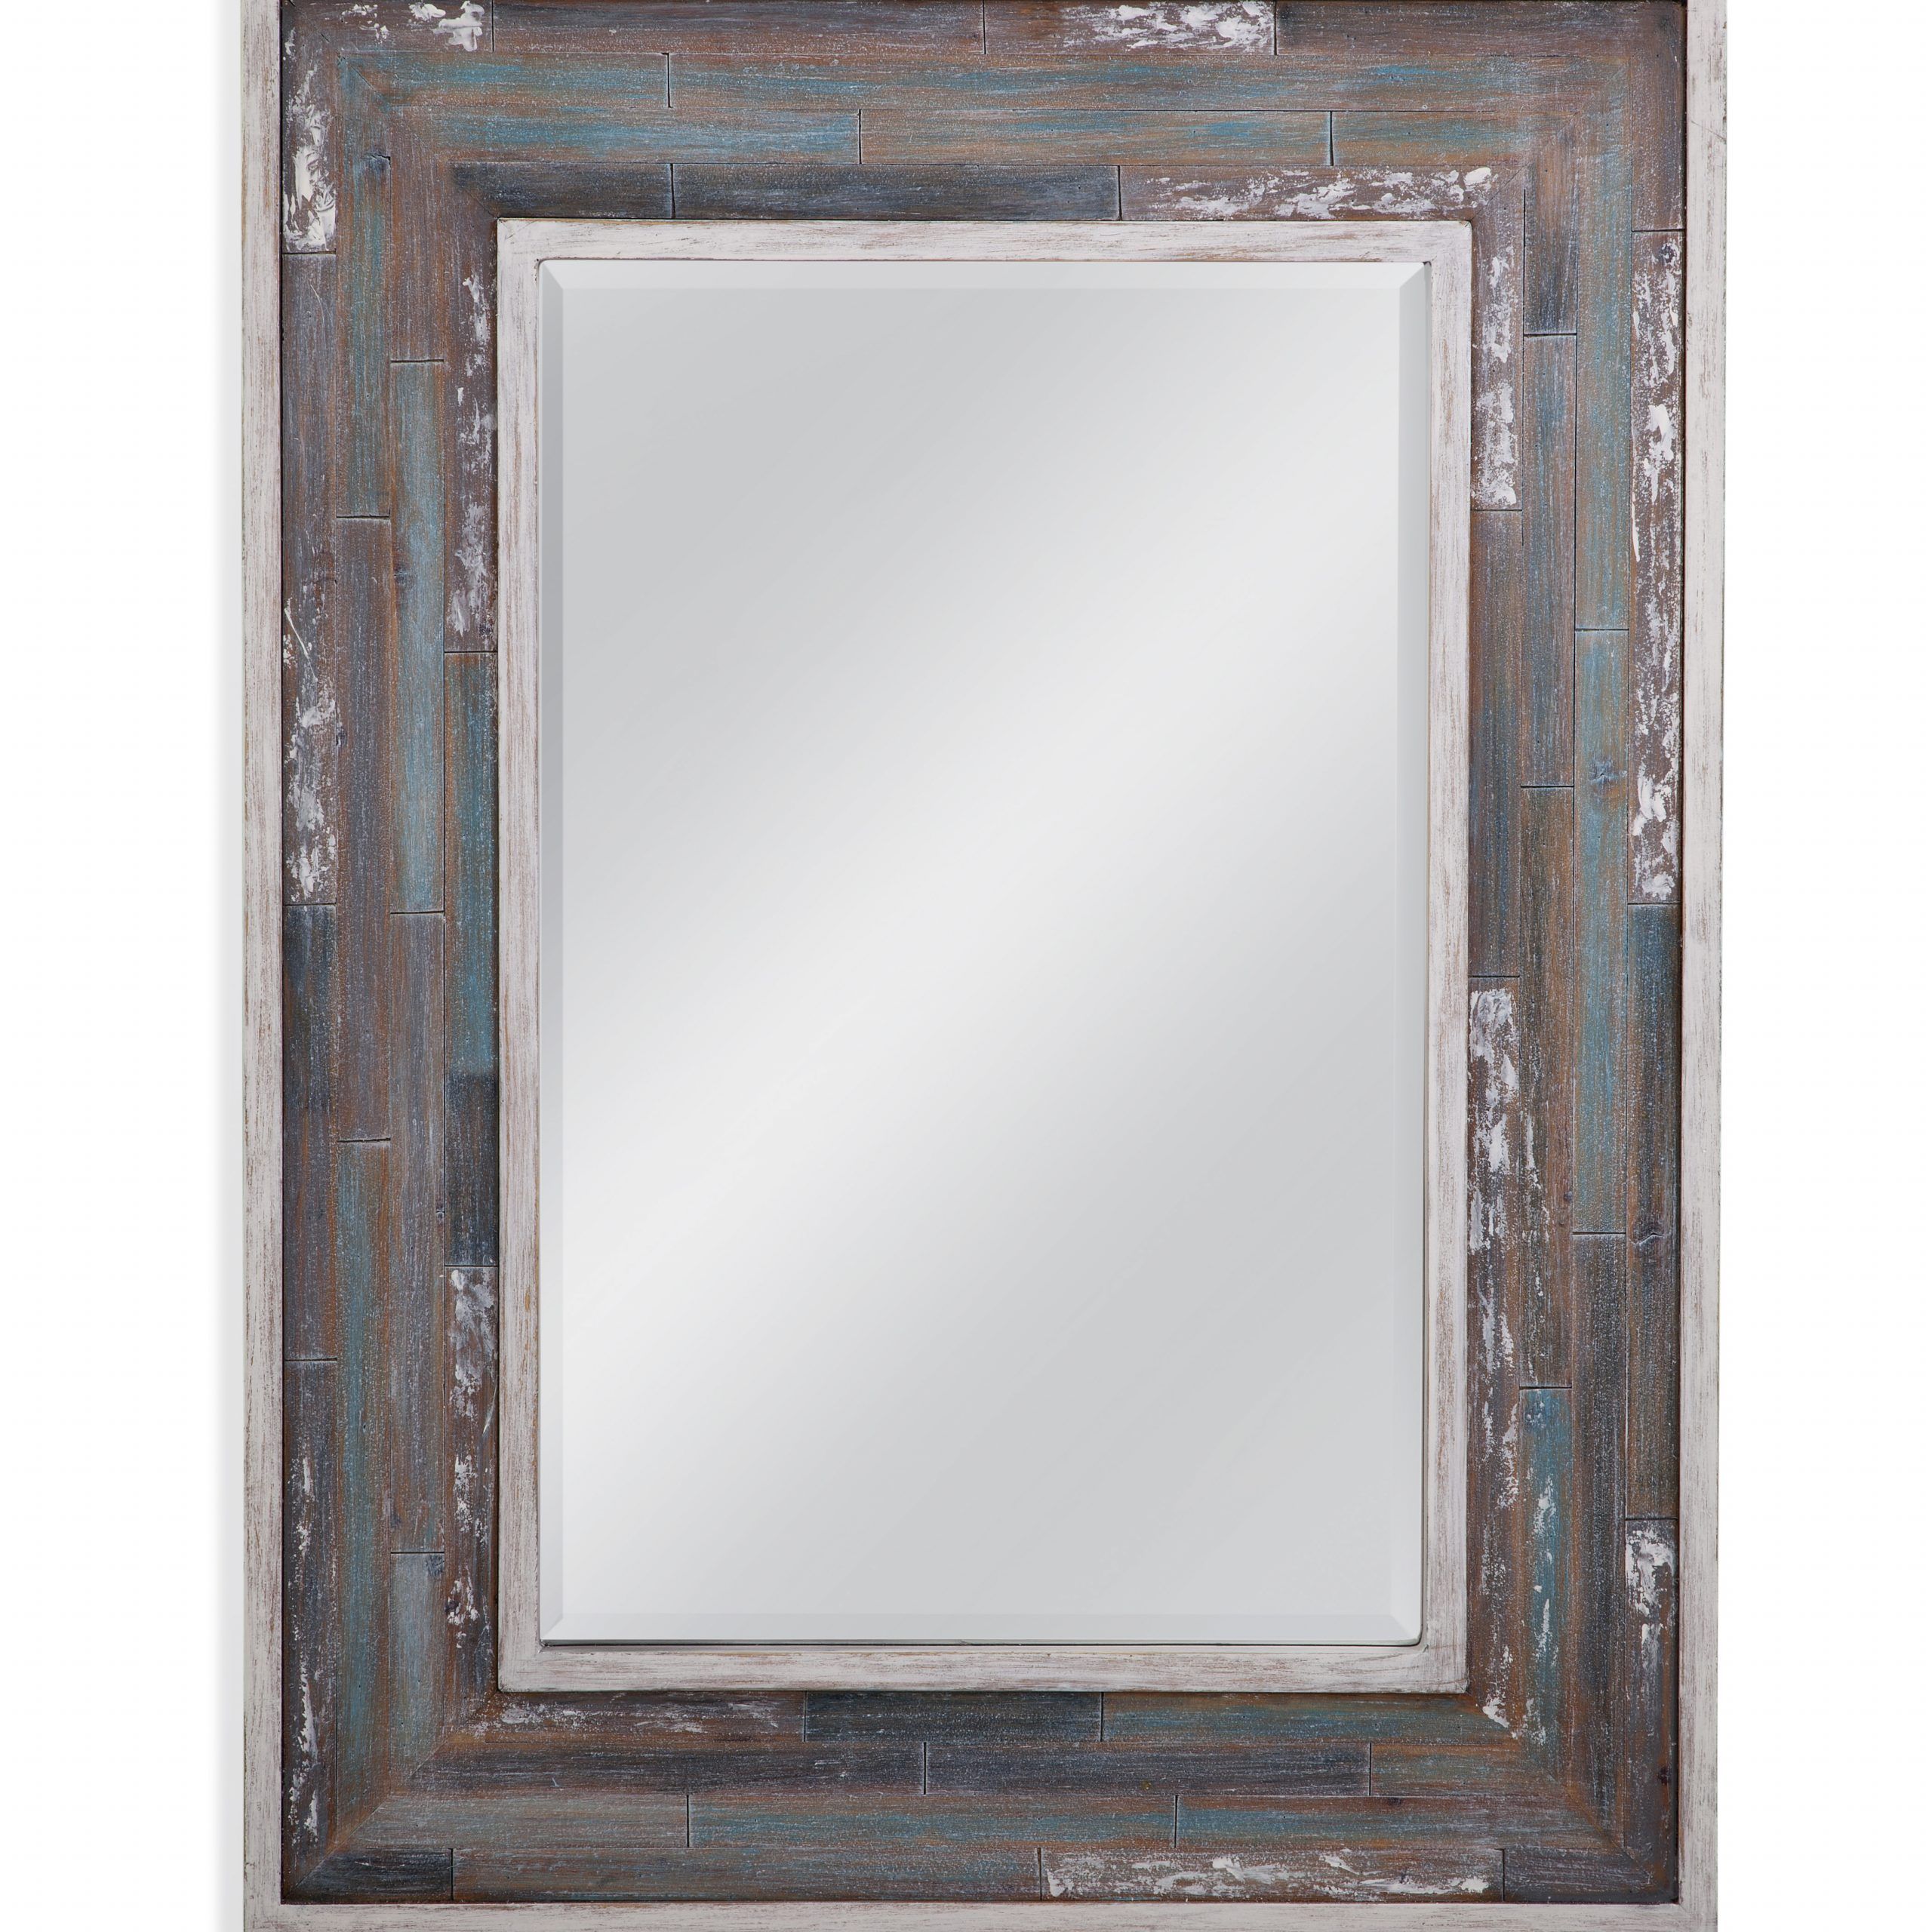 Bassett Mirror Taft Wall Mirror In Antique Silver/gold Leaf Finish Intended For Glam Silver Leaf Beaded Wall Mirrors (View 3 of 15)